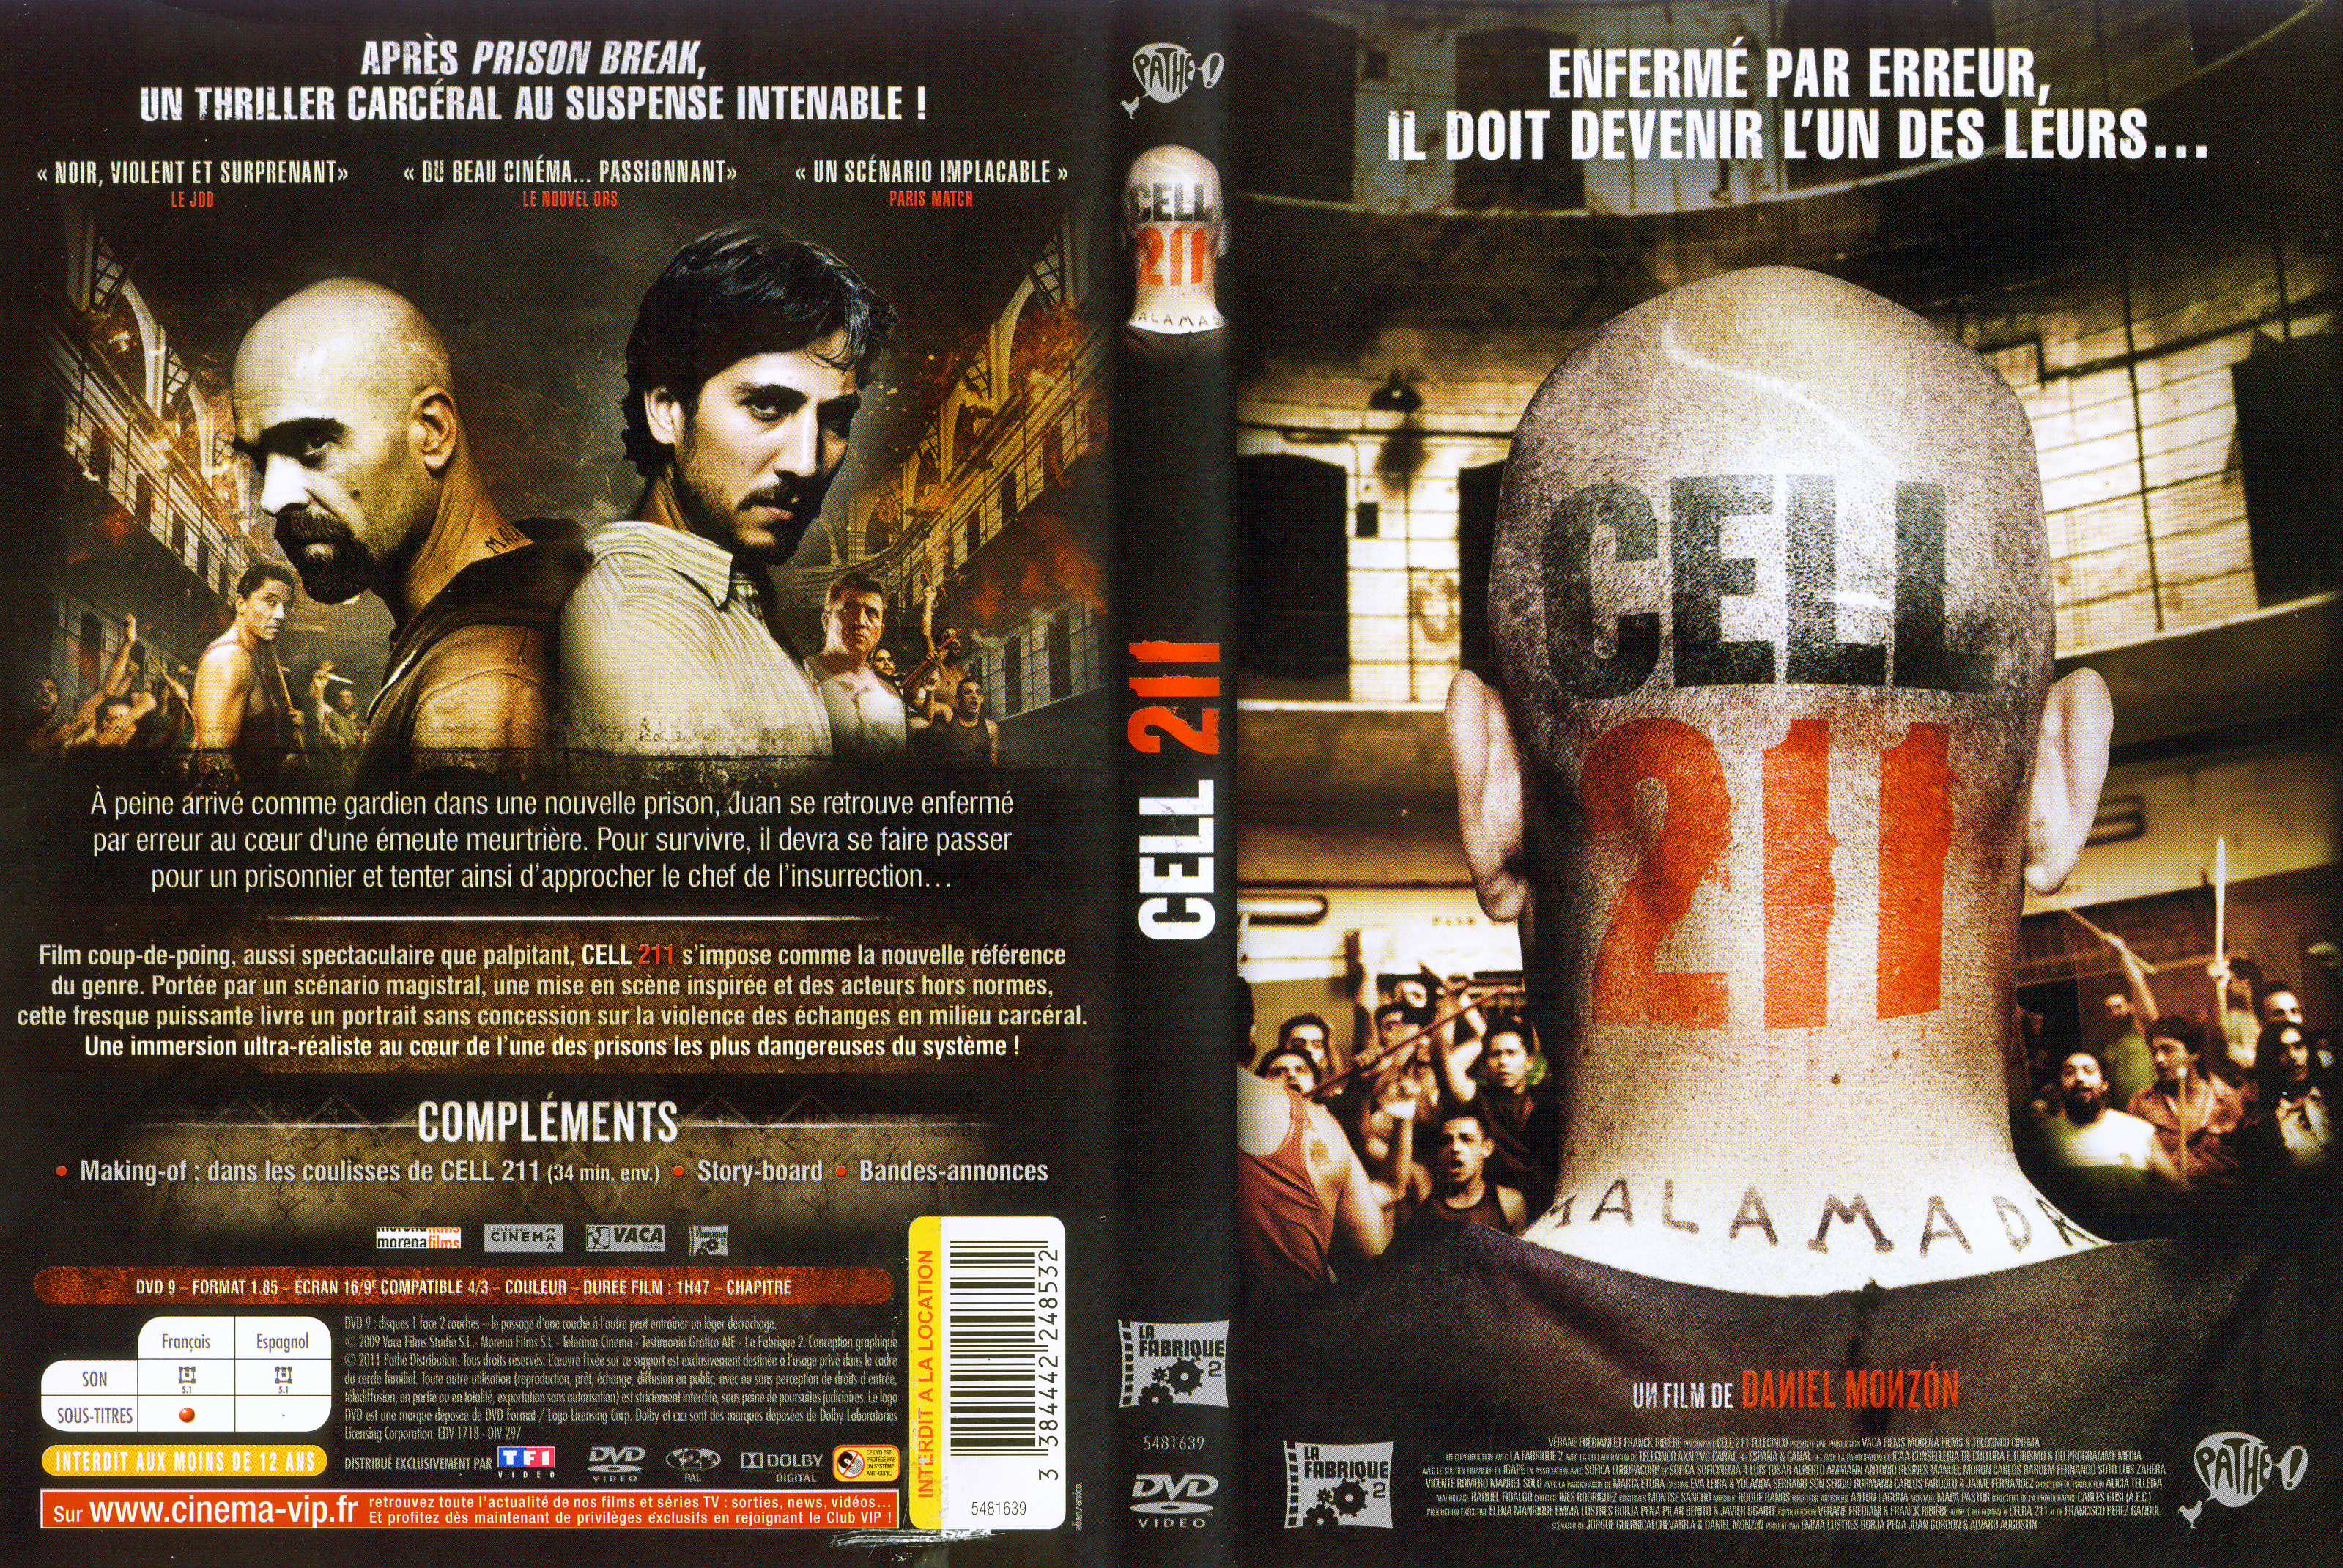 Jaquette DVD Cell 211 v2